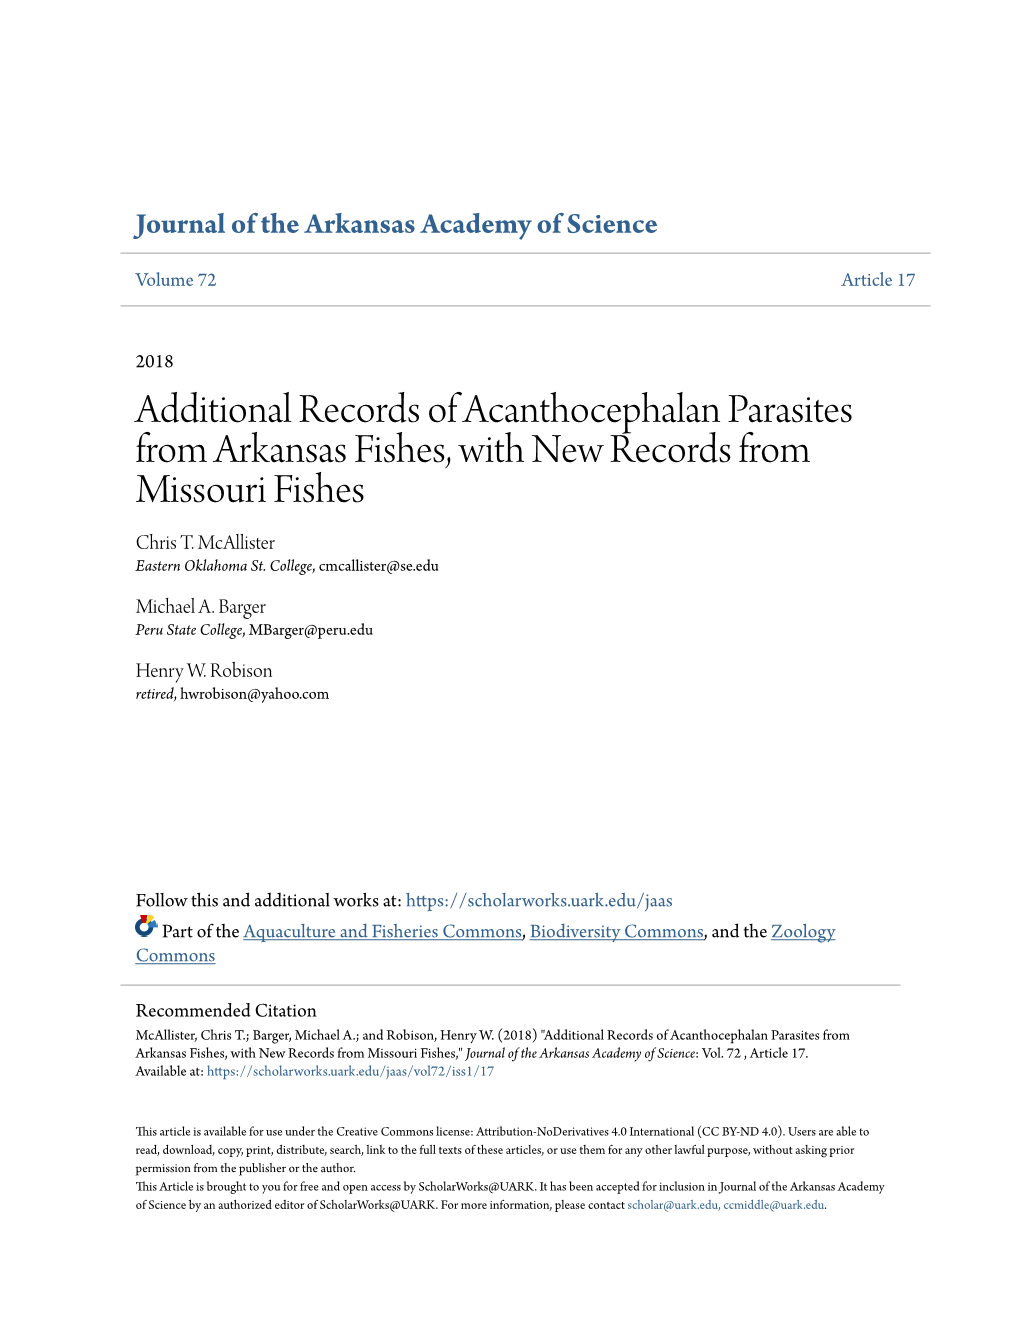 Additional Records of Acanthocephalan Parasites from Arkansas Fishes, with New Records from Missouri Fishes Chris T